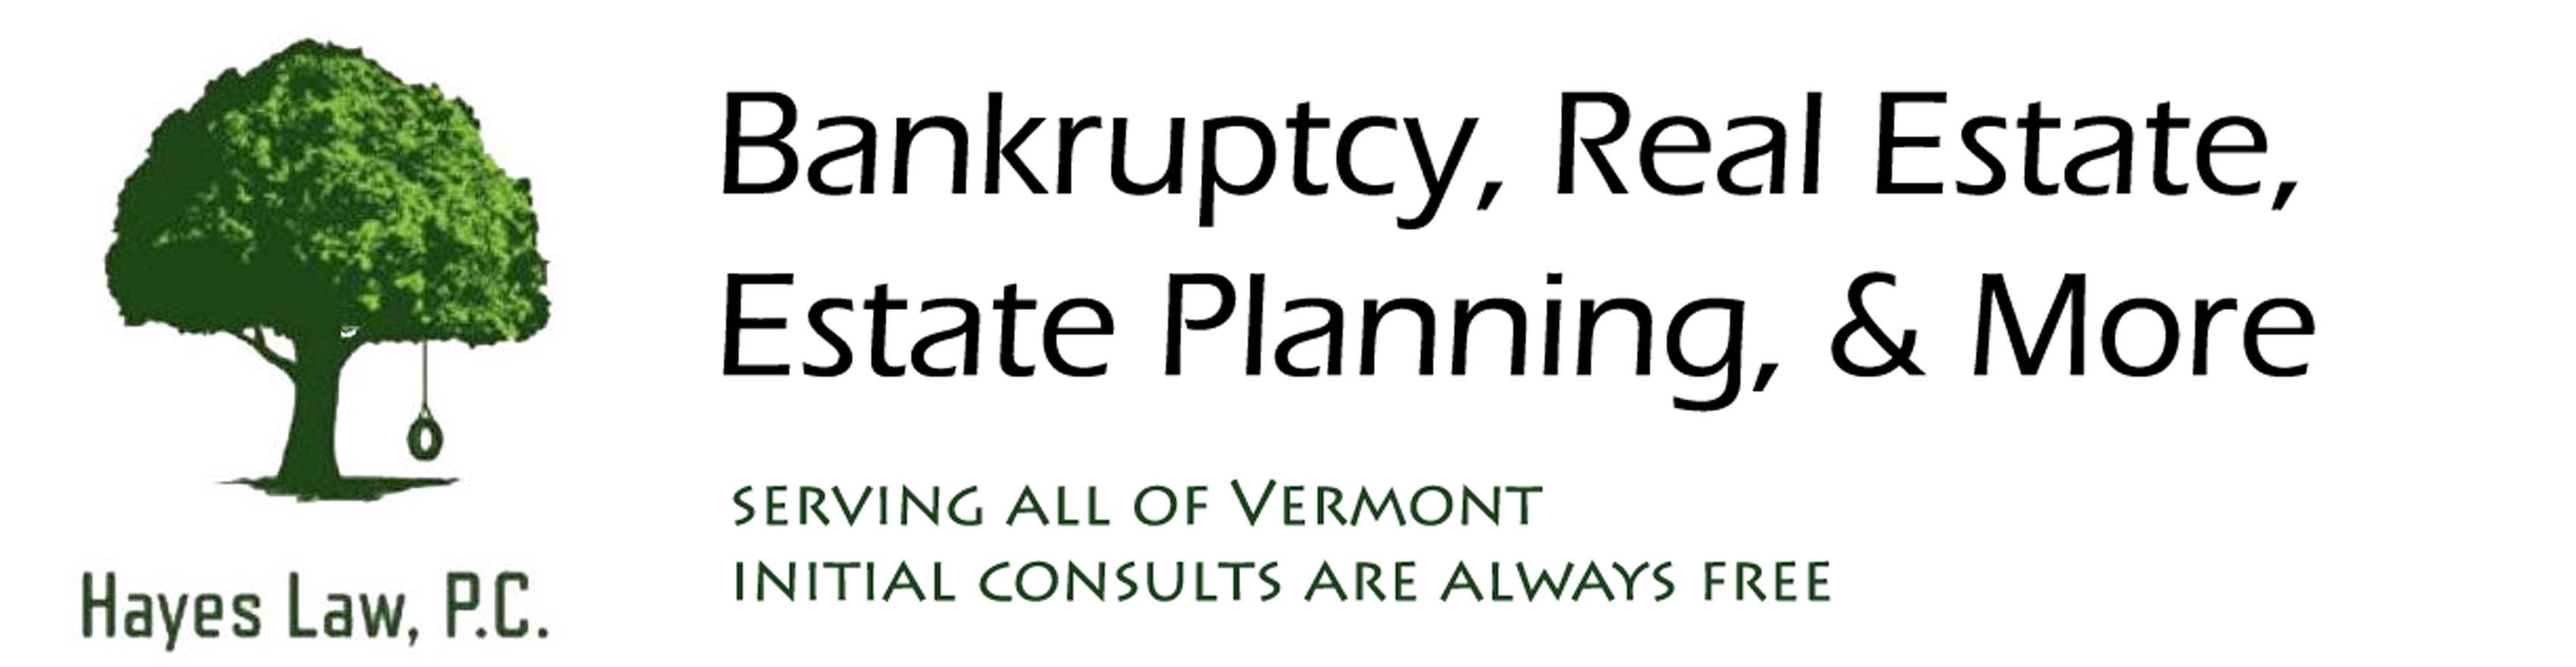 Bankruptcy, Real Estate, Estate Planning, and more.